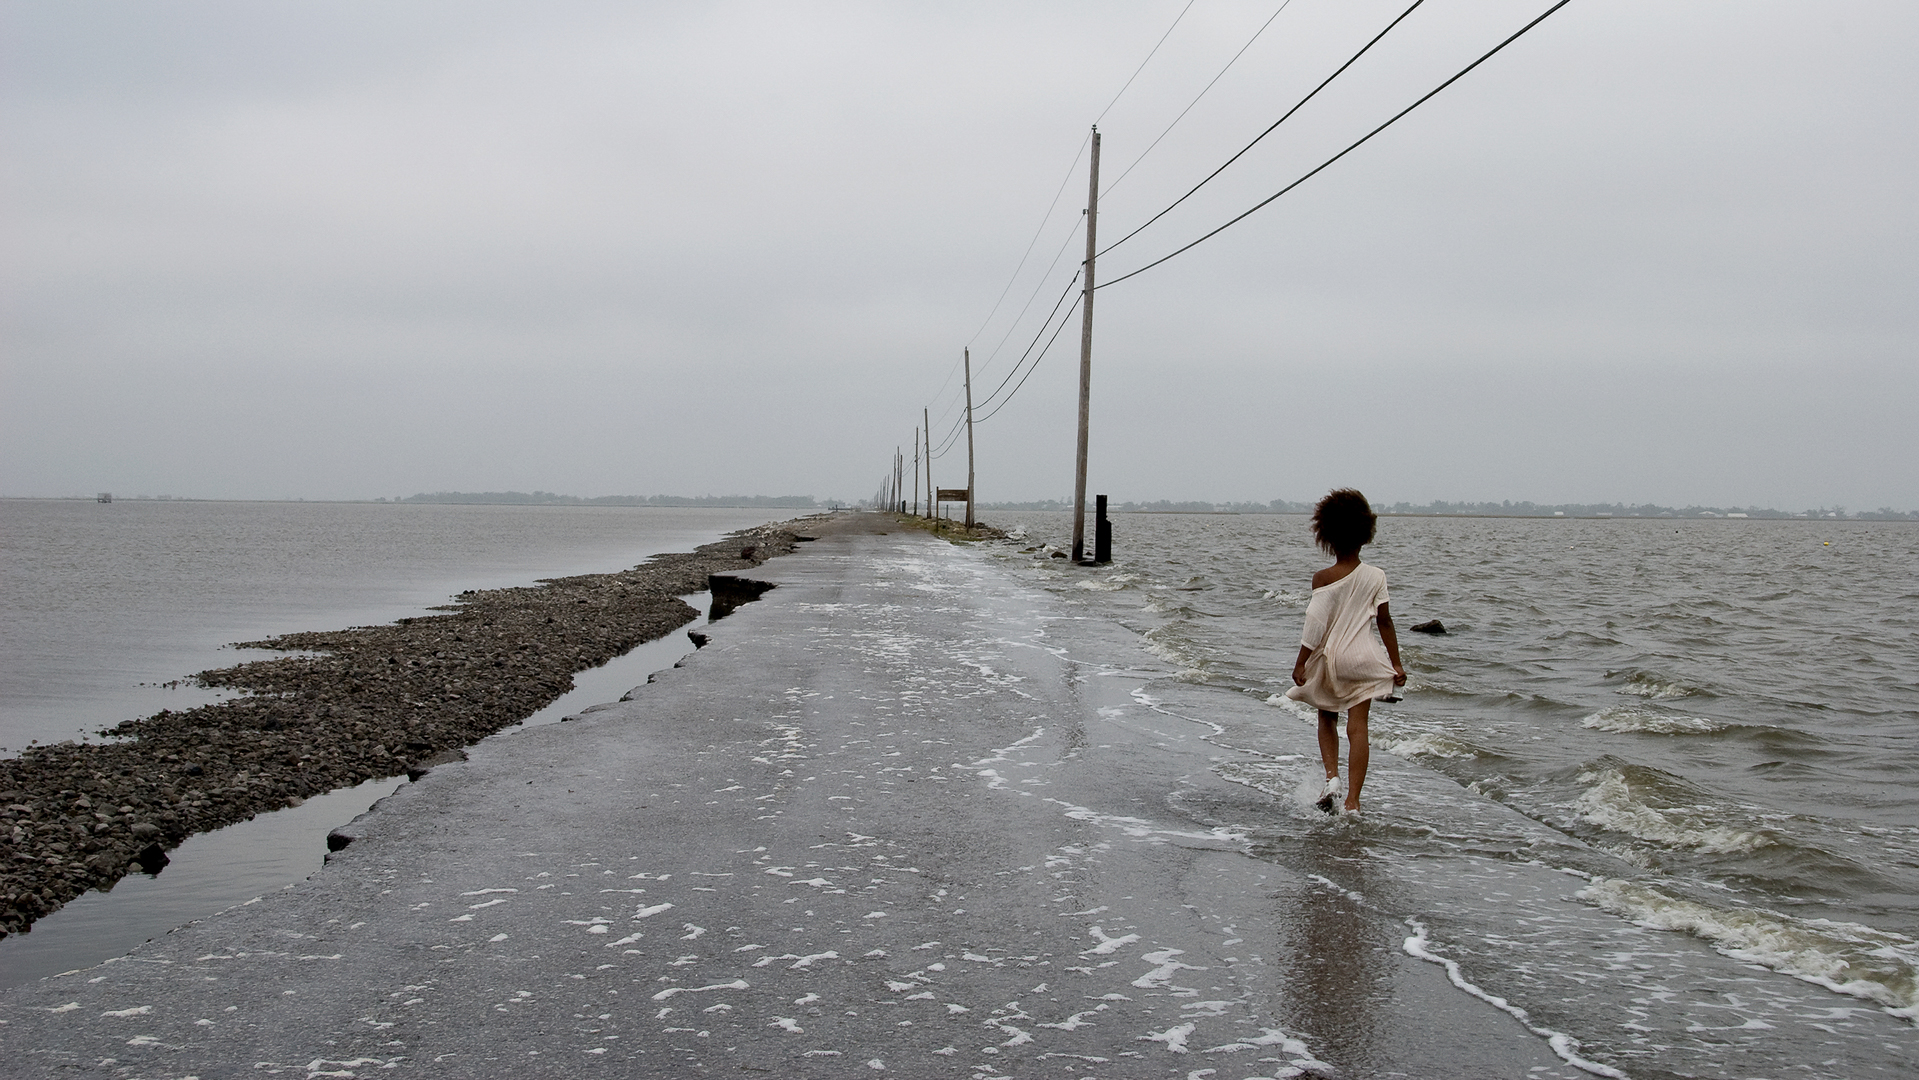 A person walks down a flooded and eroded road during a tropical storm.